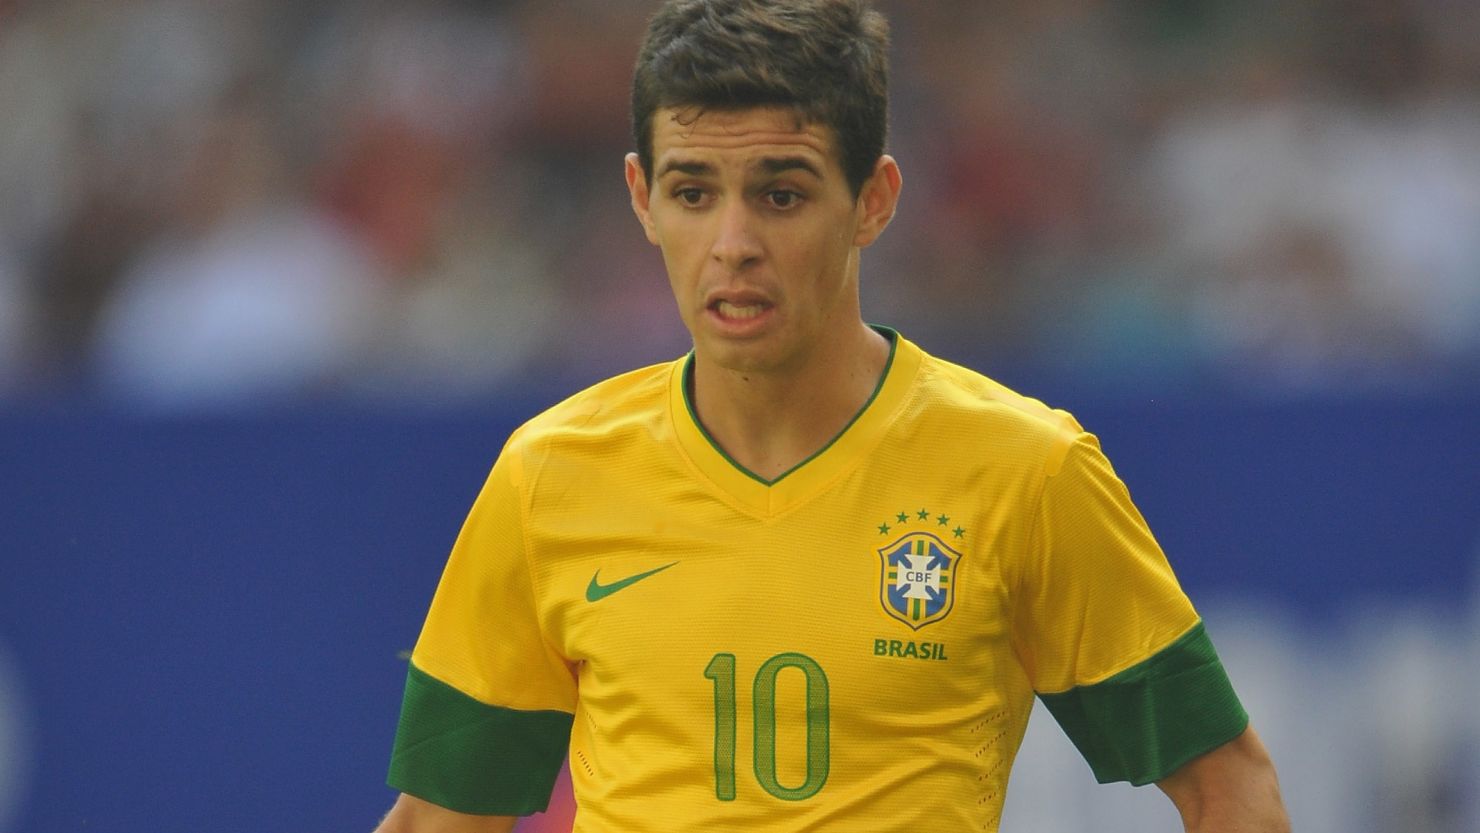 Oscar made his international debut for Brazil in September 2011 and is part of their Olympic squad